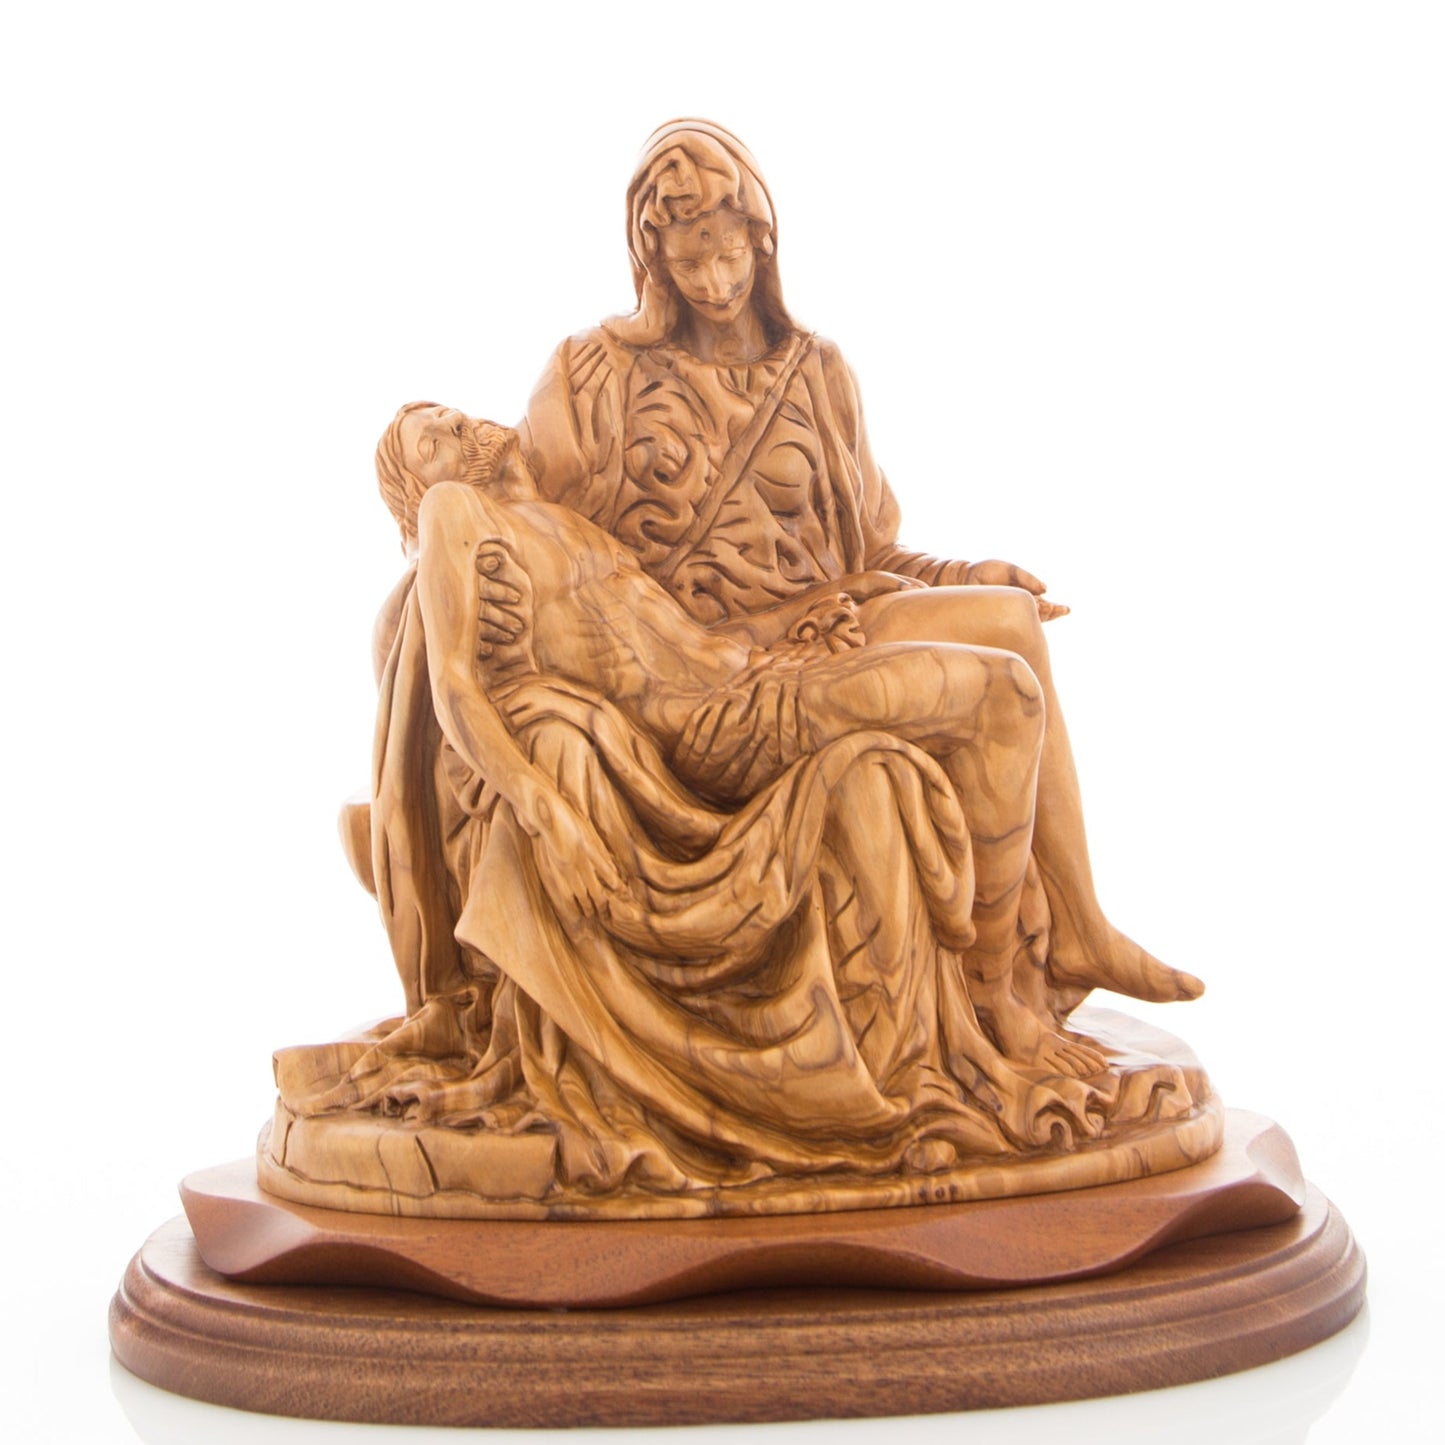 Pieta Statue, Olive Wood Carving Statue from Bethlehem 10.8"